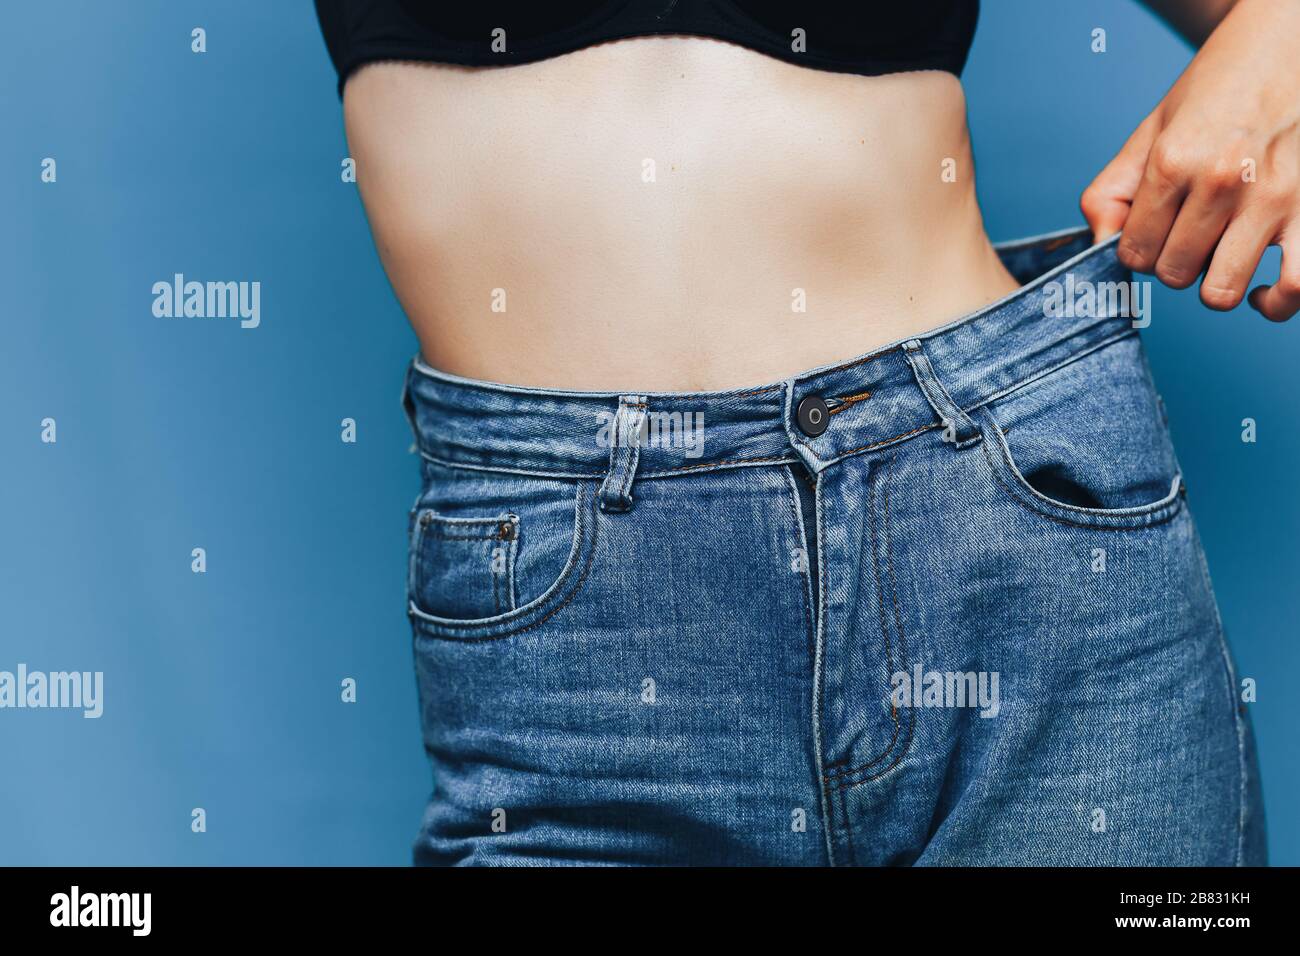 Skinny Weight Loss Woman Show Flat Stomach Pulling by Hand Oversized Big  Blue Pants Jeans. Slim Body Low Fat Healthy Size Athletic Stock Photo -  Image of large, body: 214863780